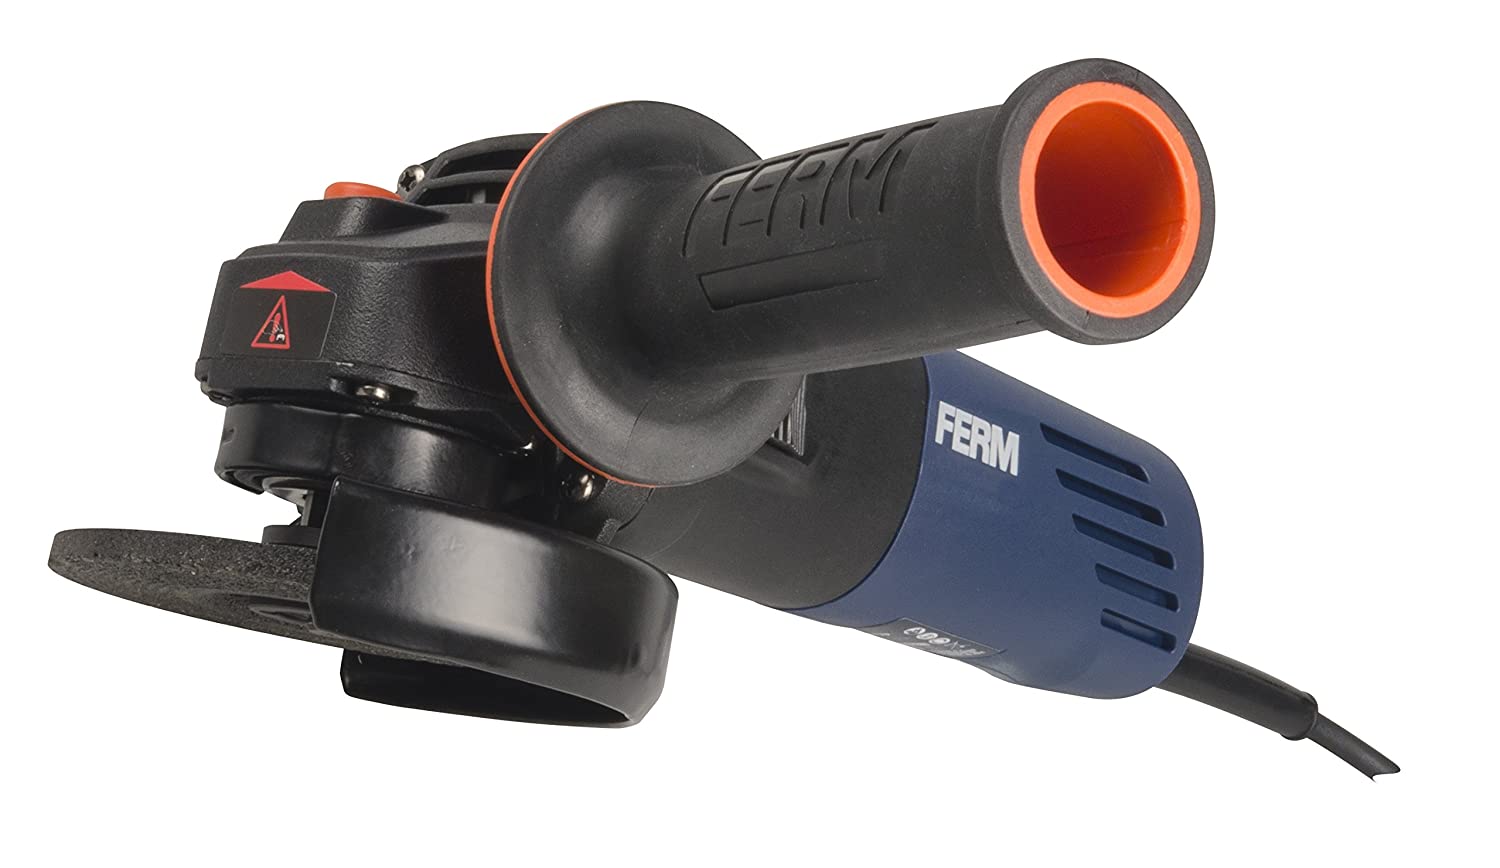 BUY FERM AGM1121P 800W ANGLE GRINDER | BEST PRICE IN INDIA | Lion Tools Mart